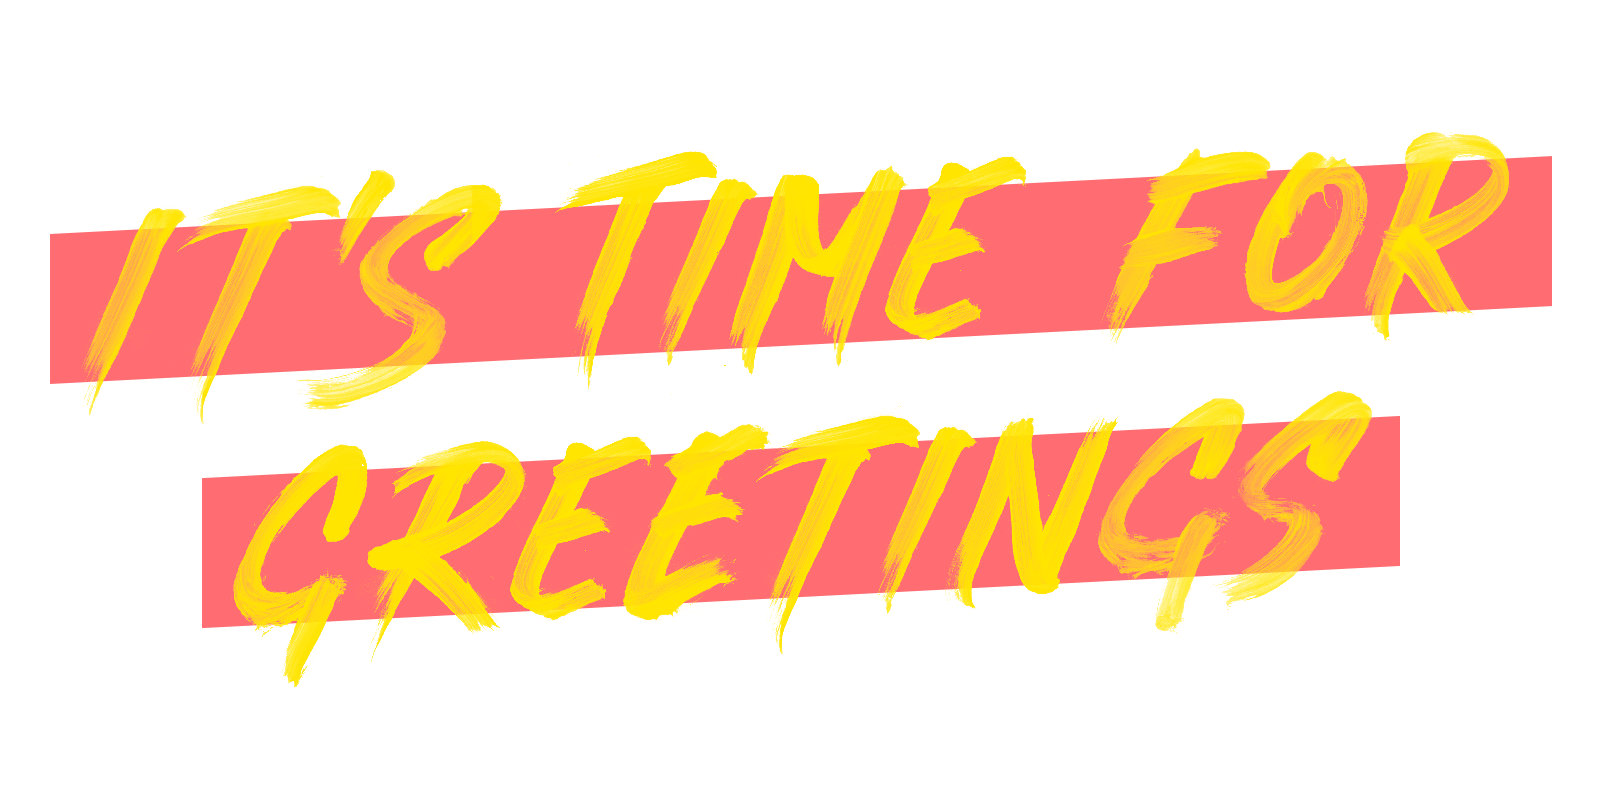 It's time for greetings - biggerband wishes